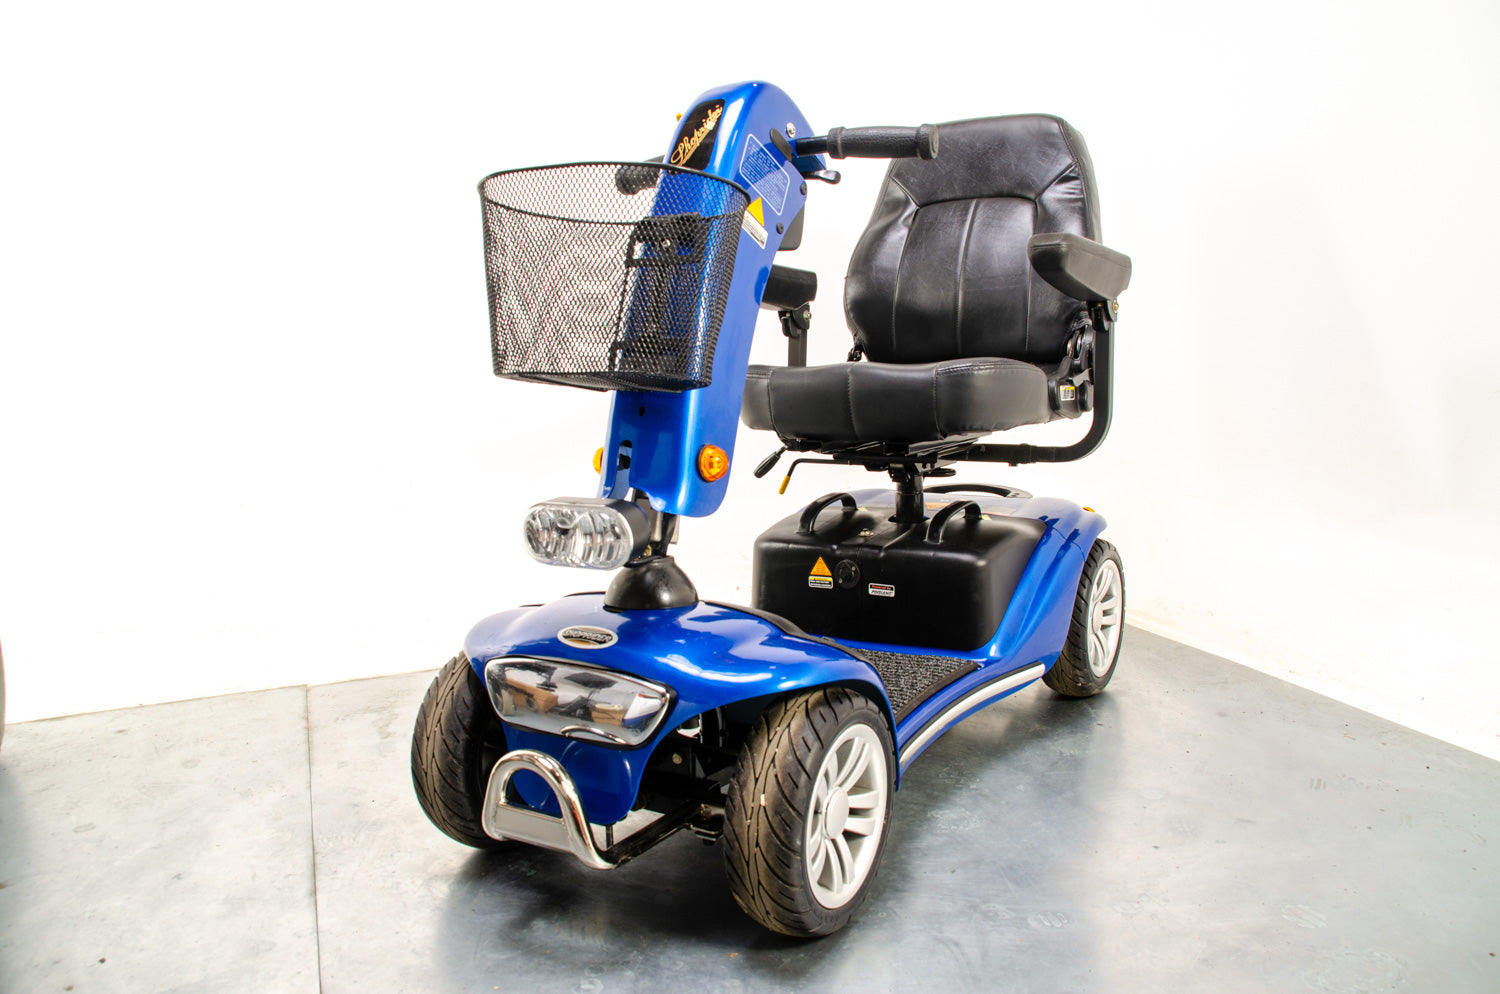 2016 Shoprider Valencia Used Mobility Scooter Transportable Pavement GK10 Folding Blue